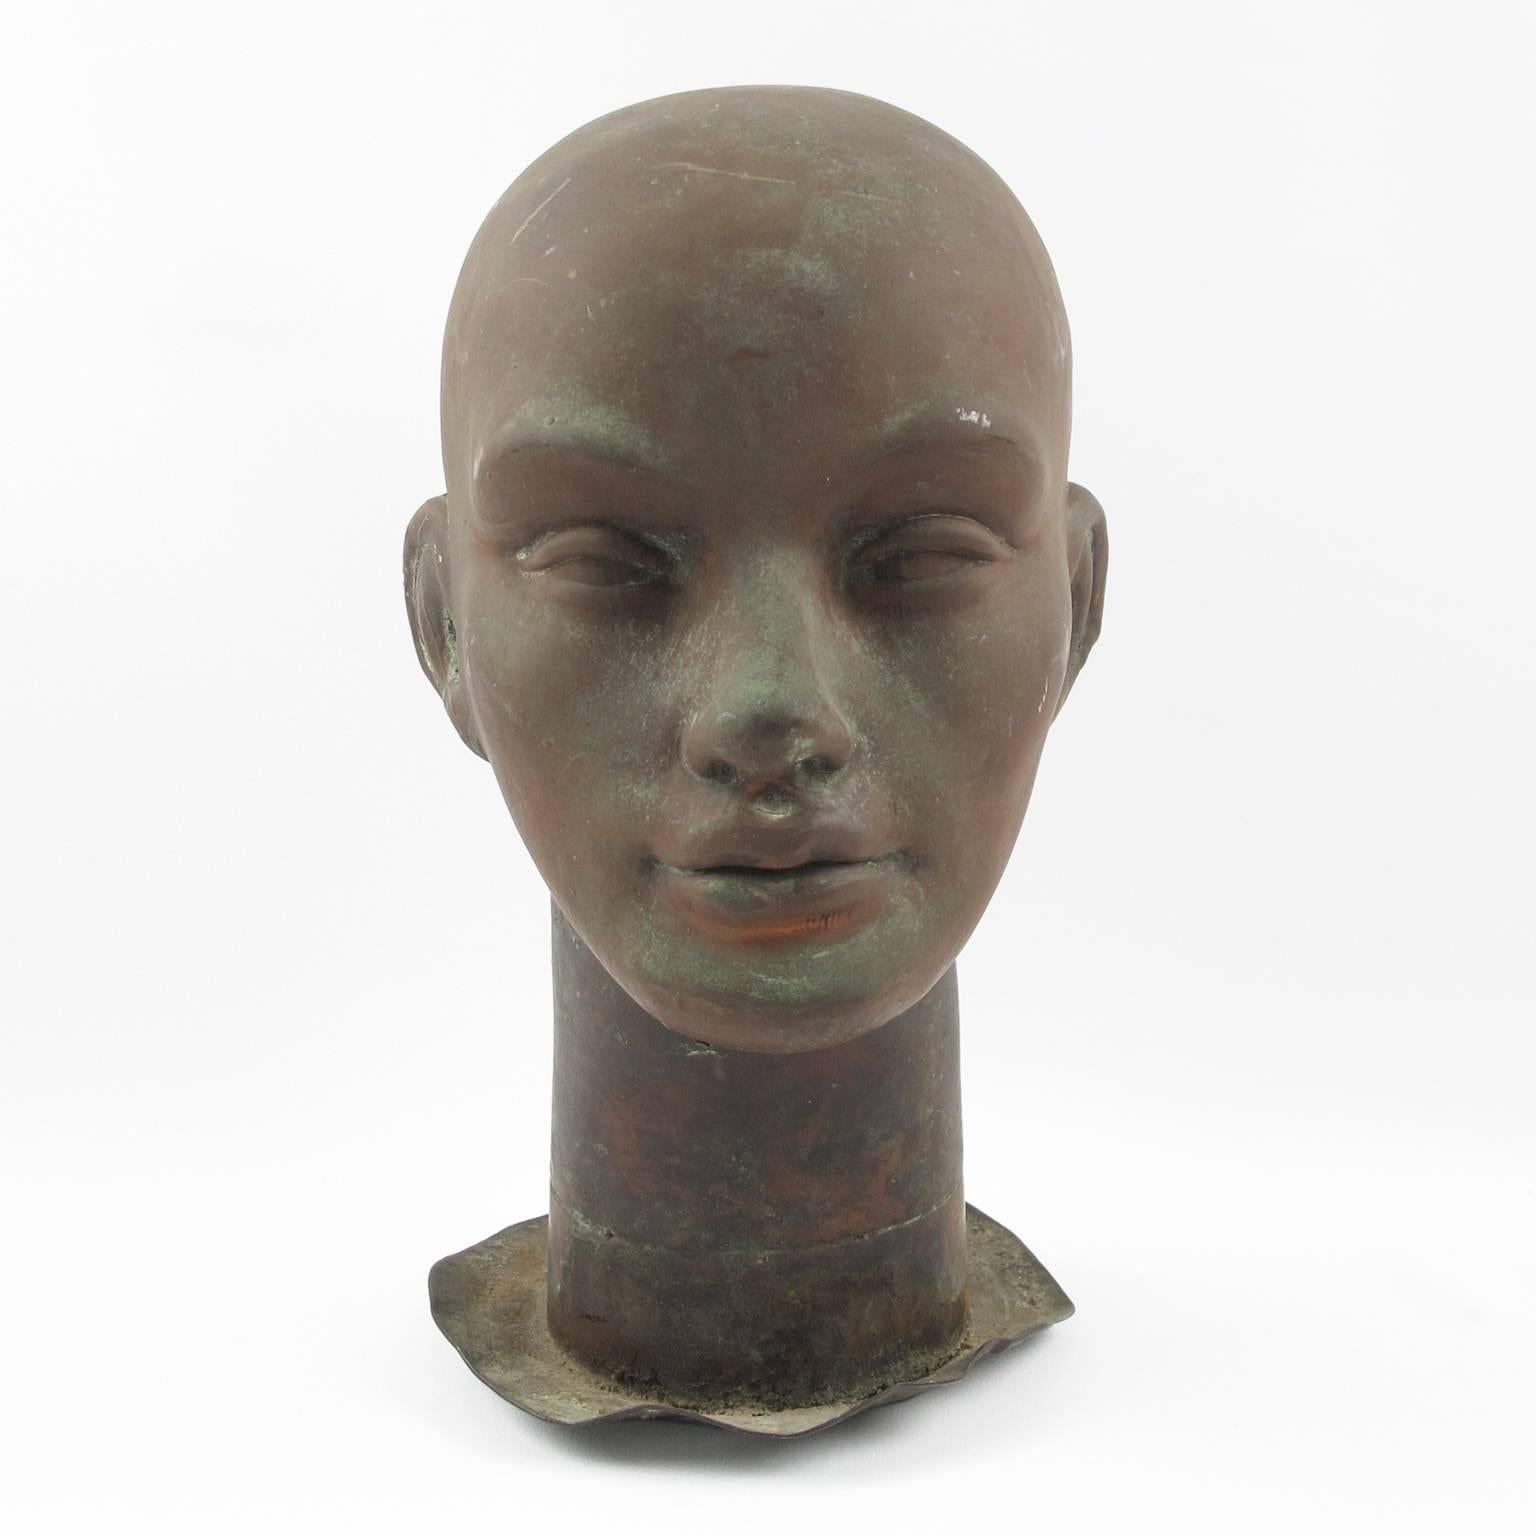 Rare stunning French factory Industrial adult head mold. This is a young woman head. It was probably made for an advertisement figure of some sort or was used as model parts. The mold is made of copper and has a (Made in France) reverse tag in the